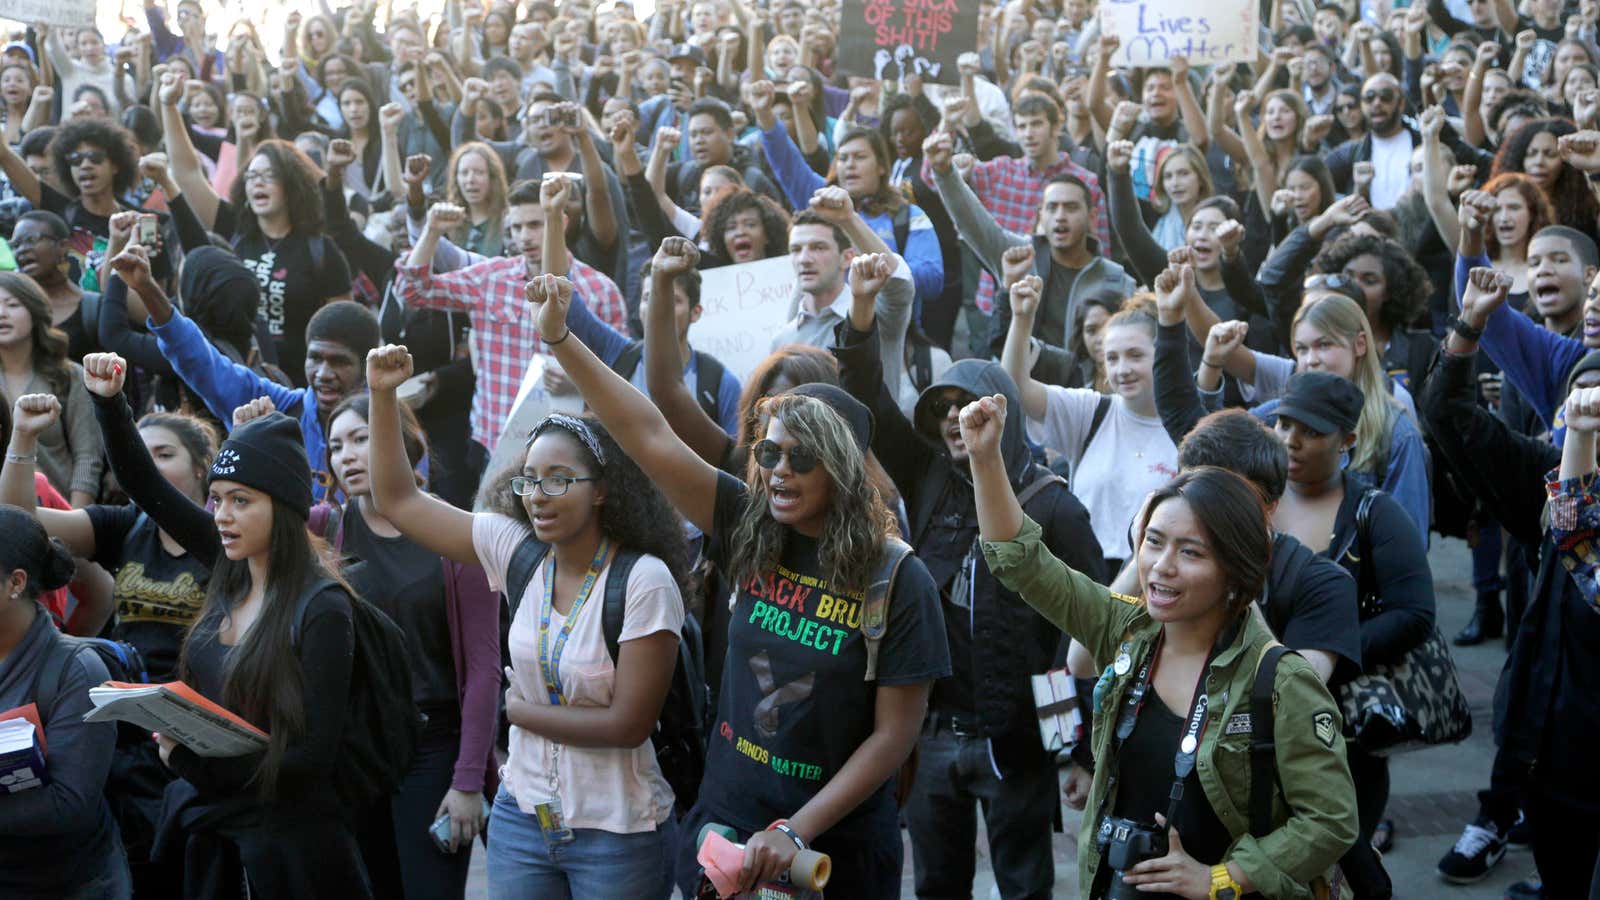 UCLA students show solidarity with protesters at the University of Missouri on Nov. 12.